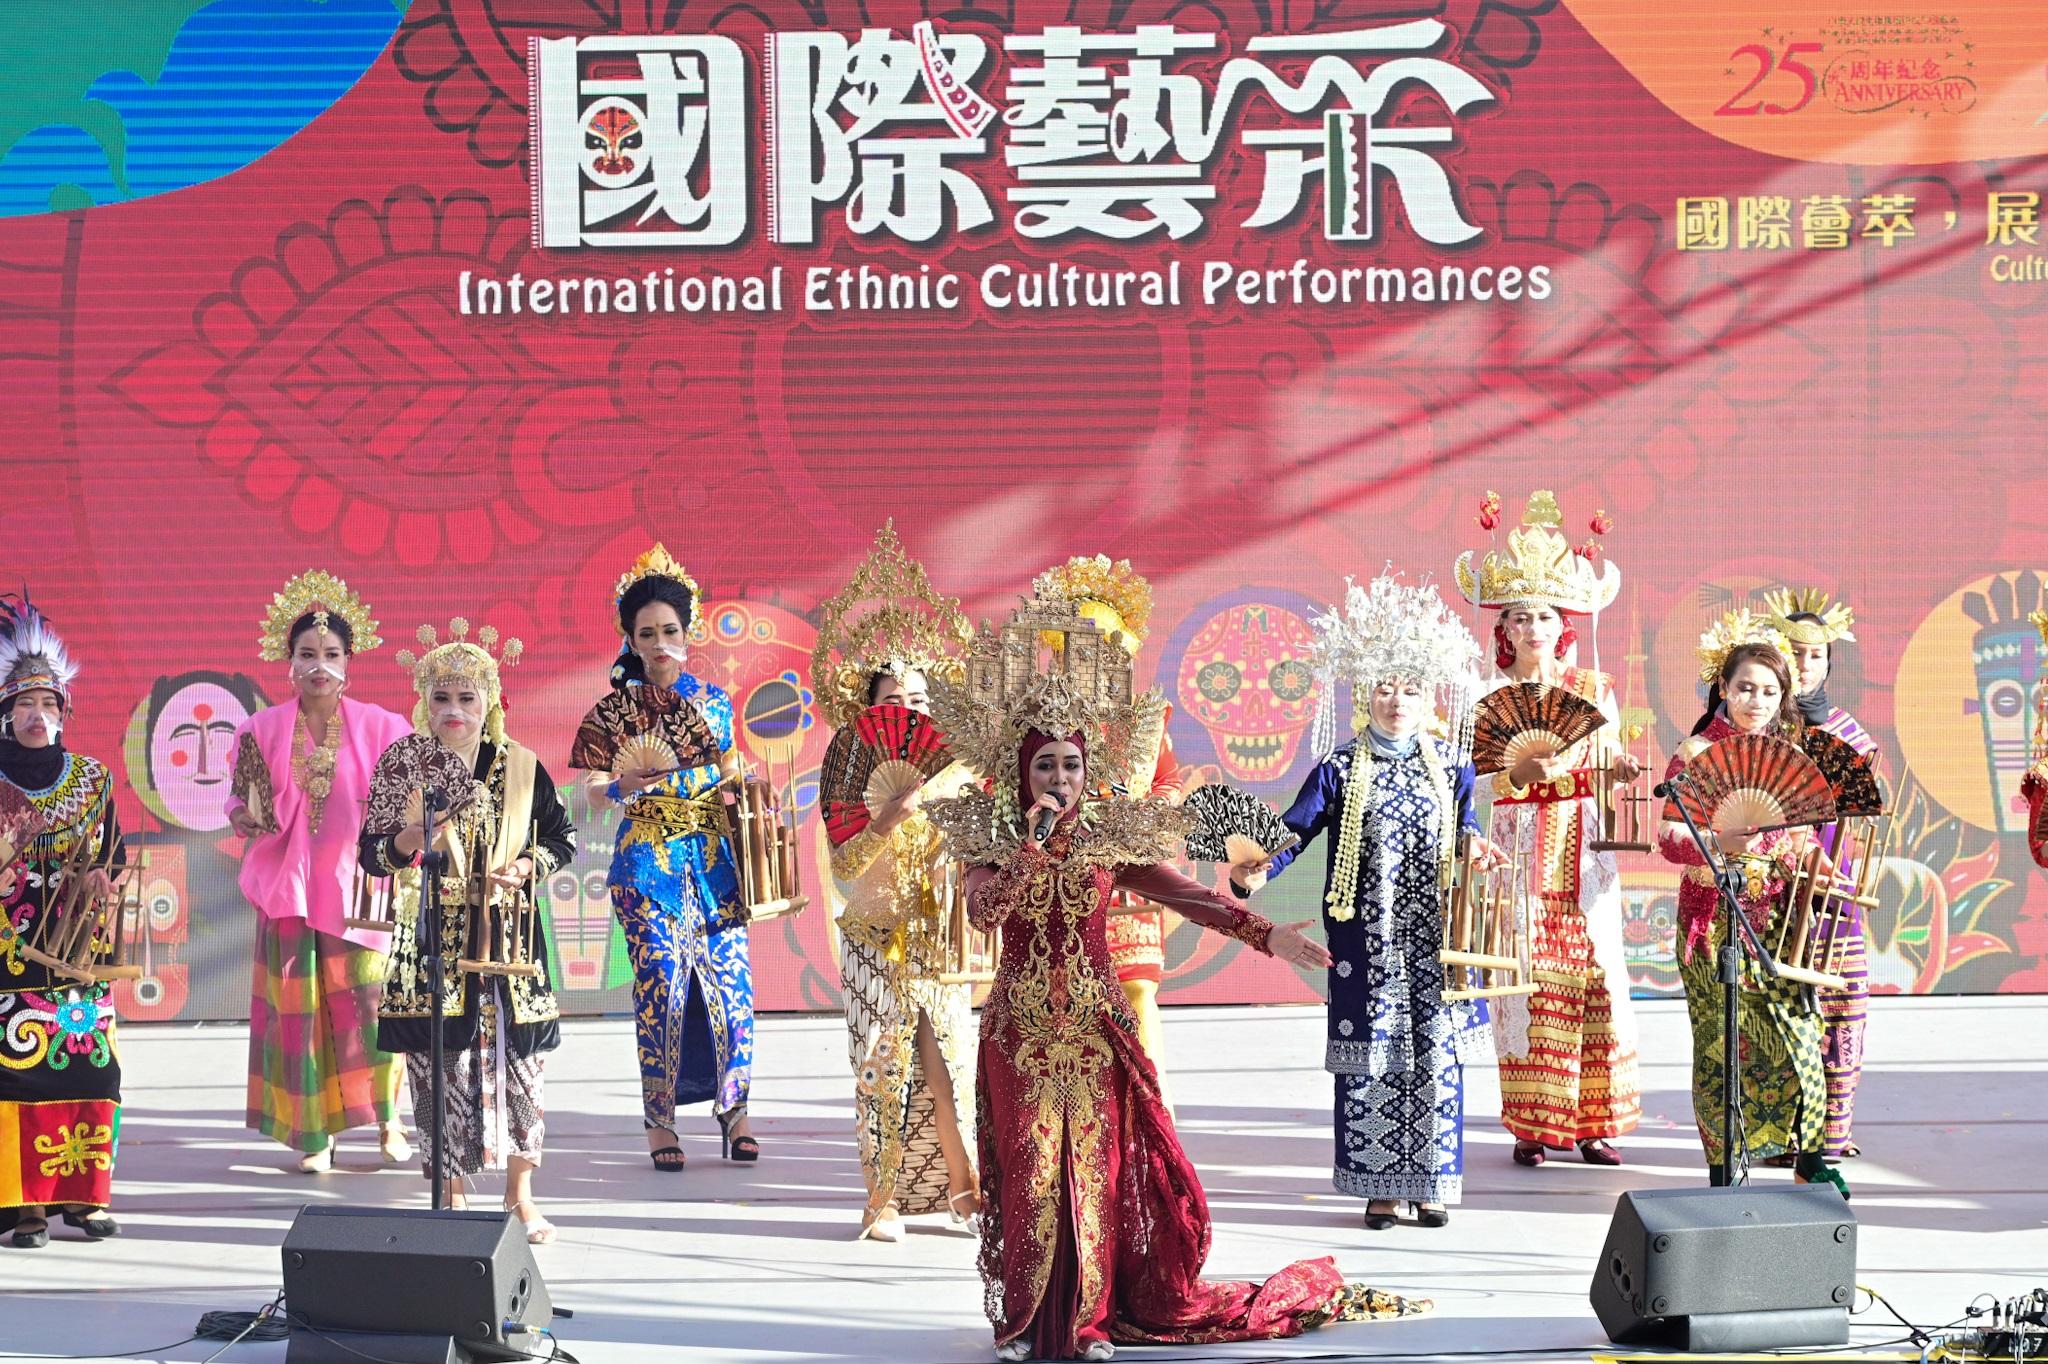 The Leisure and Cultural Services Department held the International Ethnic Cultural Performances at the Hong Kong Cultural Centre Piazza this afternoon (November 13), showcasing the artistry and cultures of different parts of the world through a variety of activities including ethnic stage performances, cultural masks displays and fringe activity booths. Photo shows the Indonesian ethnic dance performance.